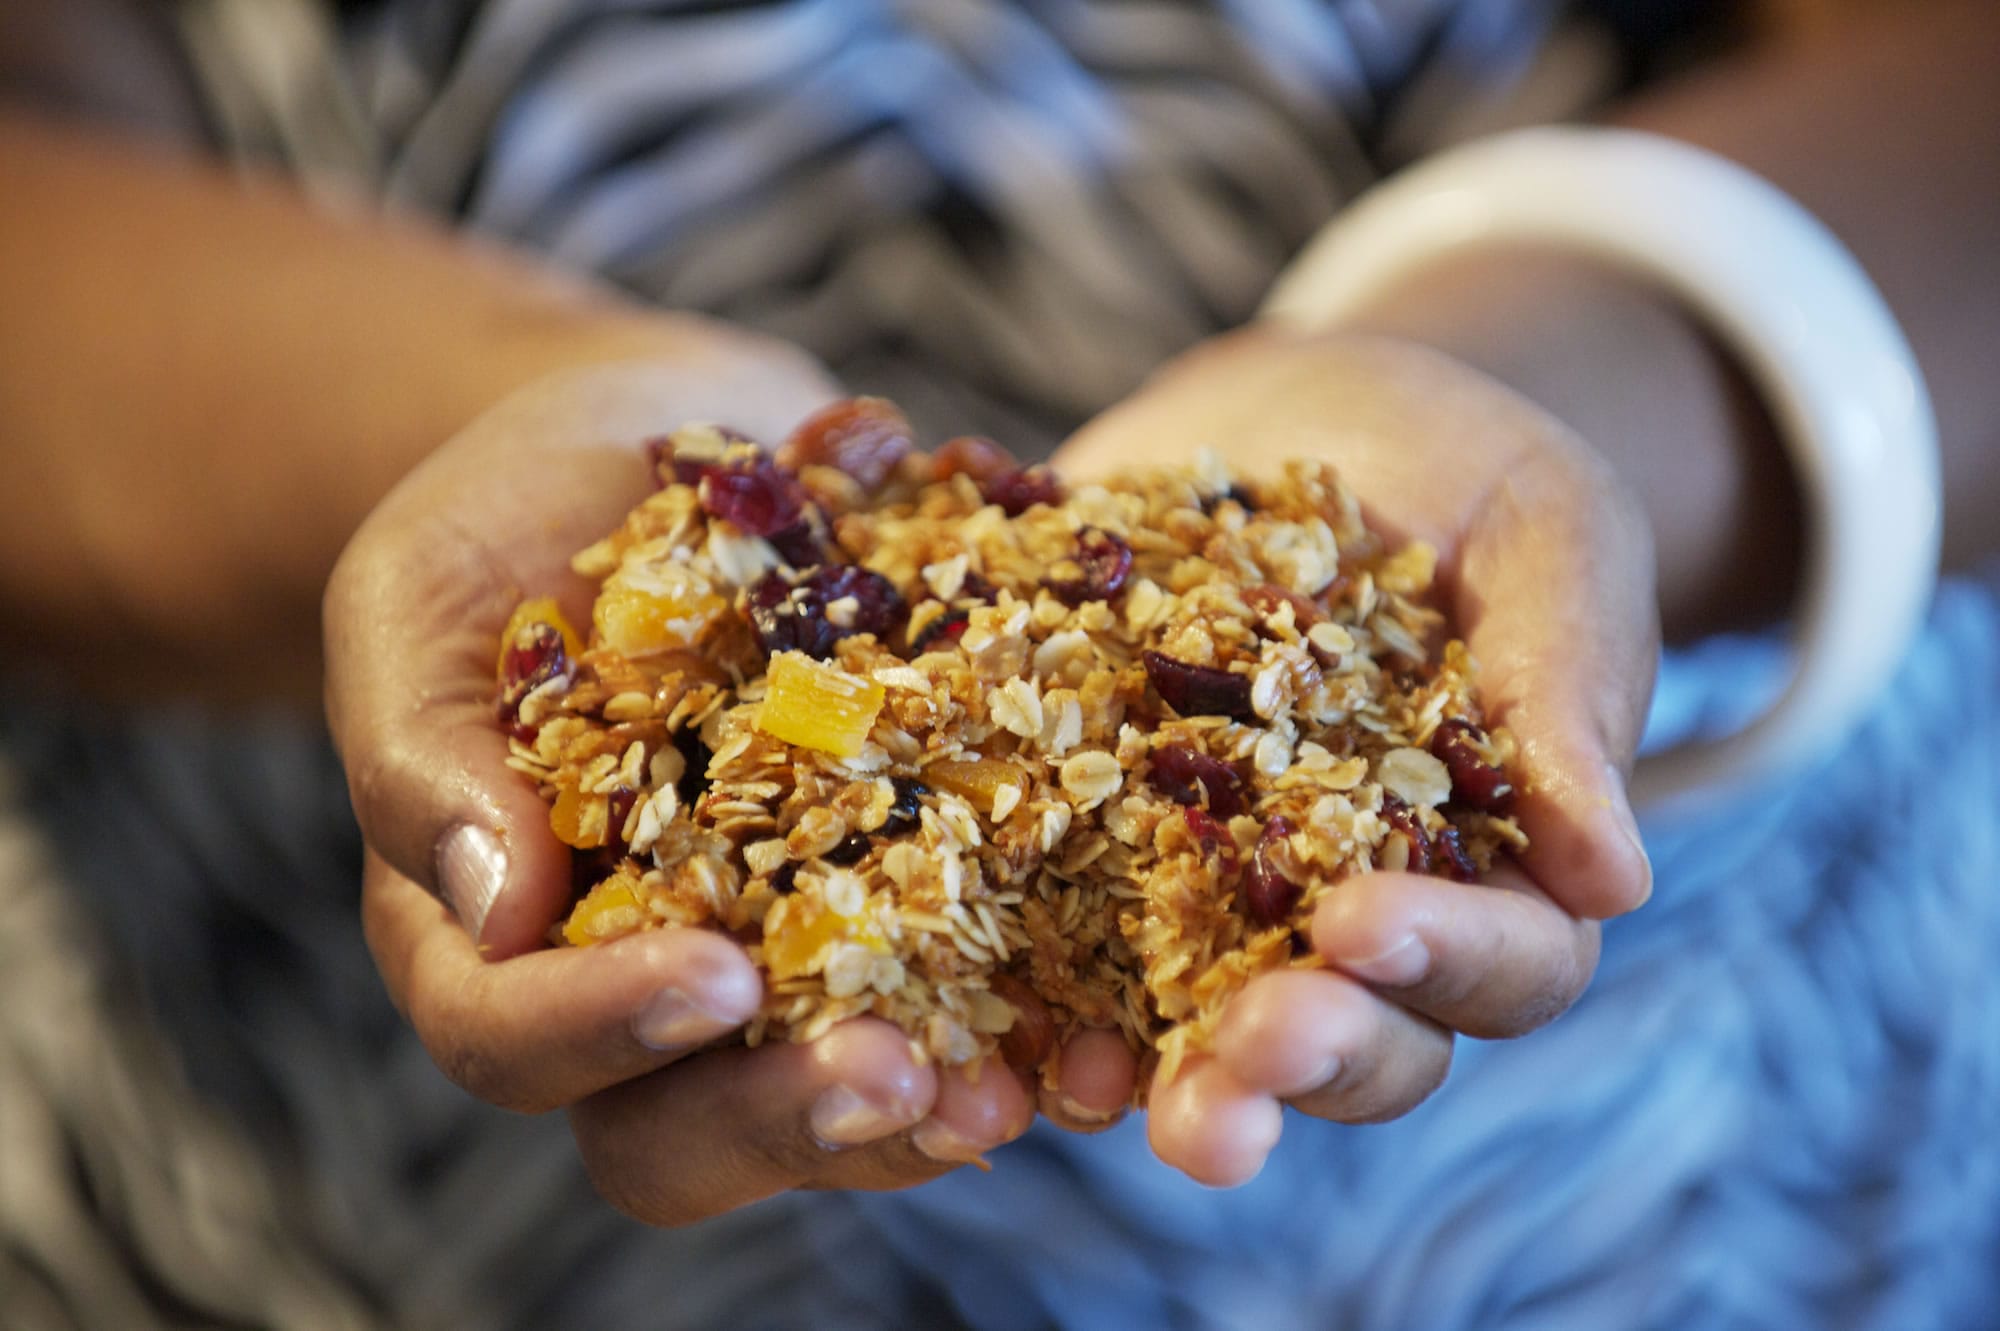 Vancouver resident and cookbook author Chrisetta Mosley scoops up a handful of homemade fruit and nut granola.